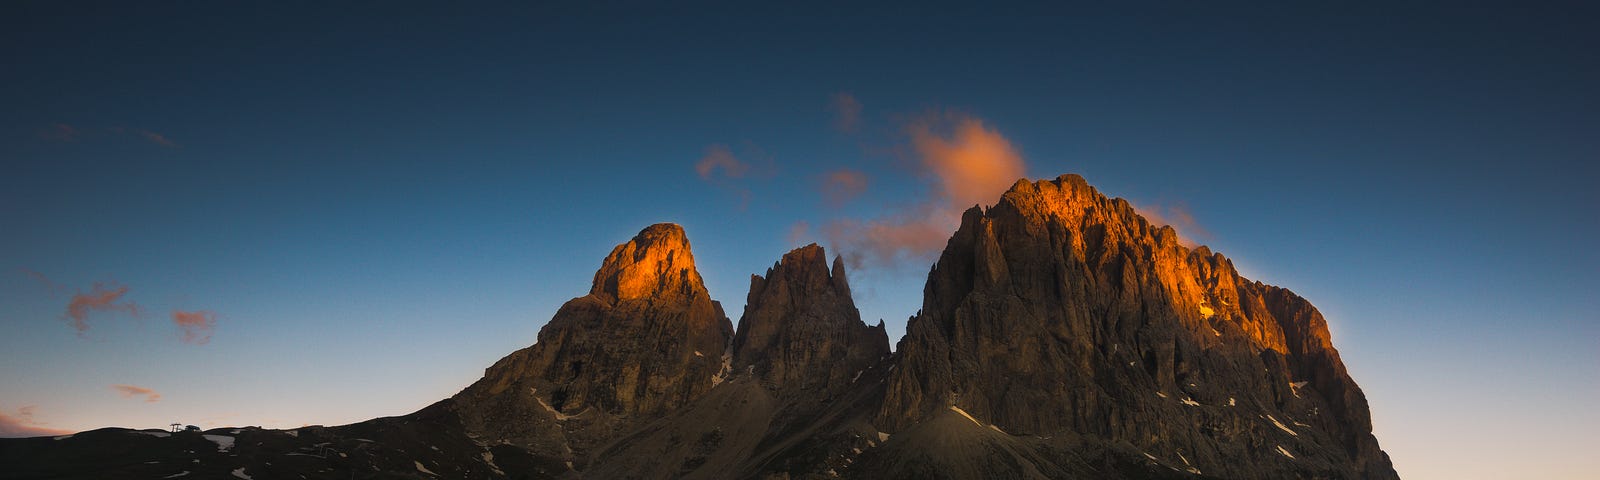 The first rays of sun illuminate the tips of majestic mountain peaks